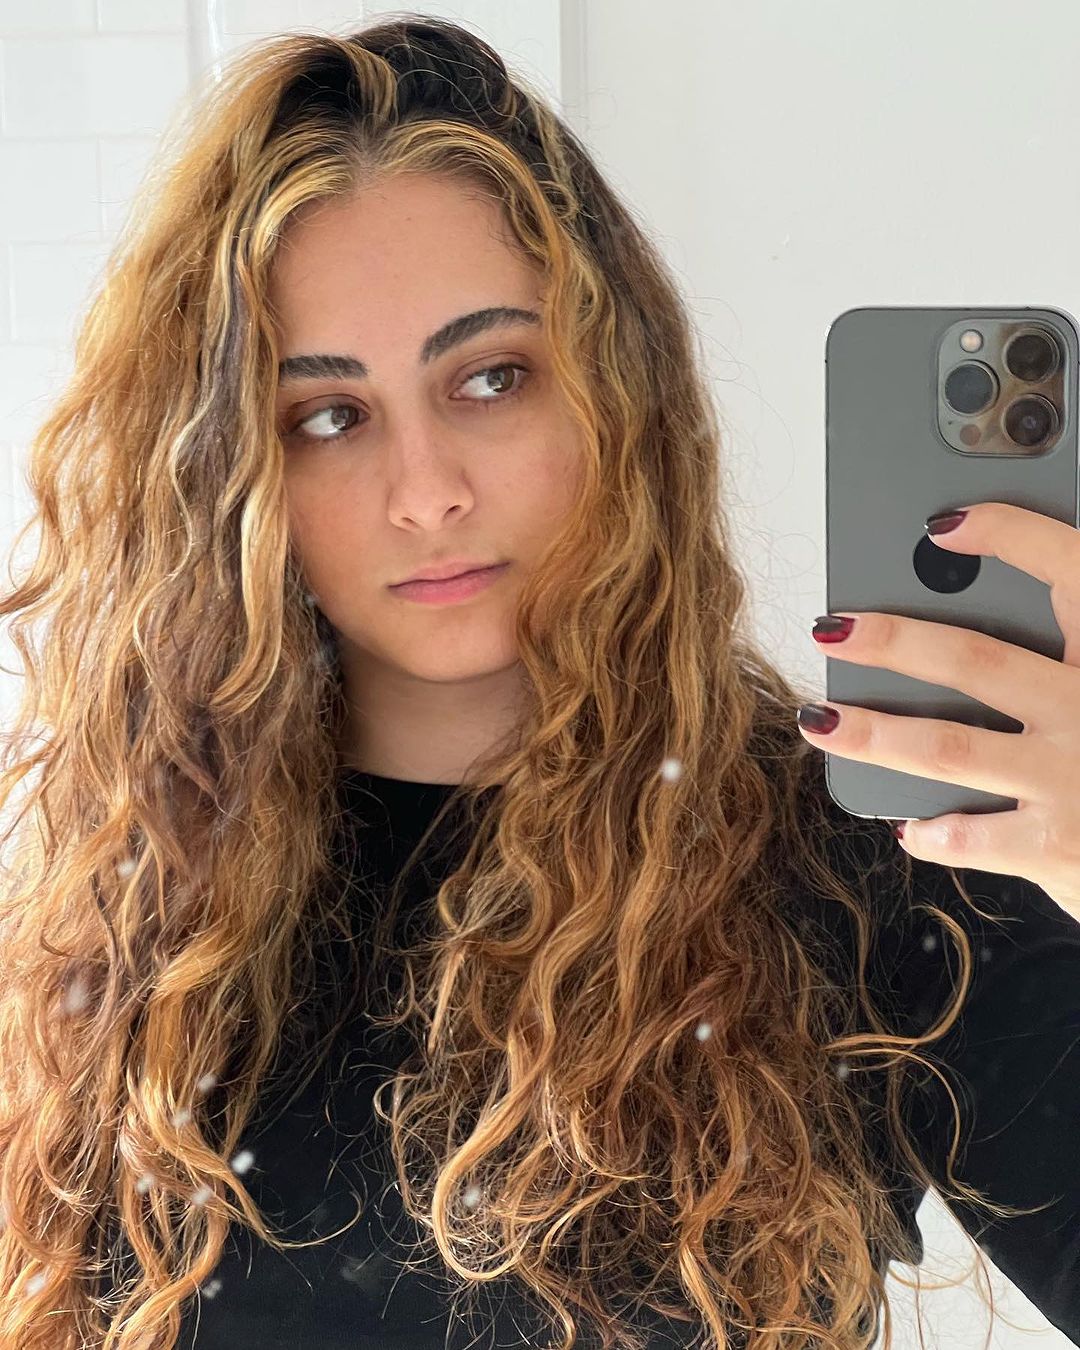 A woman taking a photo with her phone in the mirror with long curly hair and face-framing highlights.